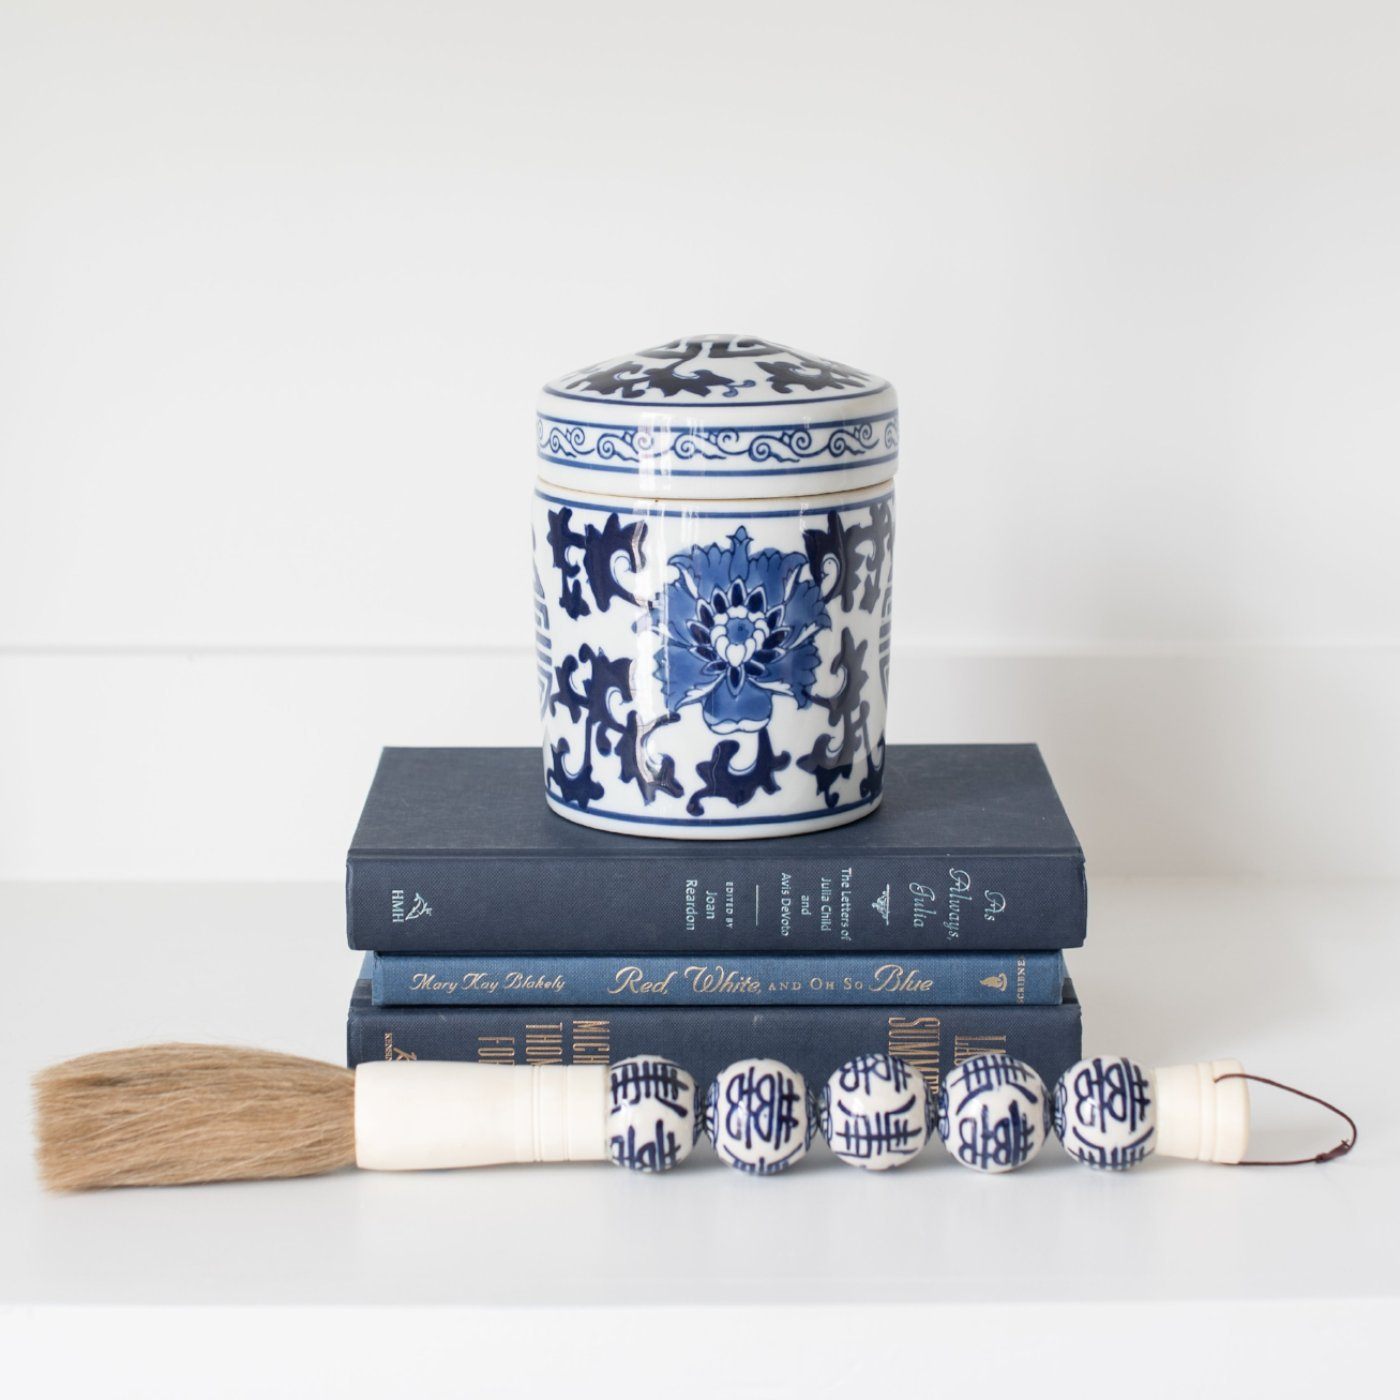 Blue and White Porcelain Calligraphy Set